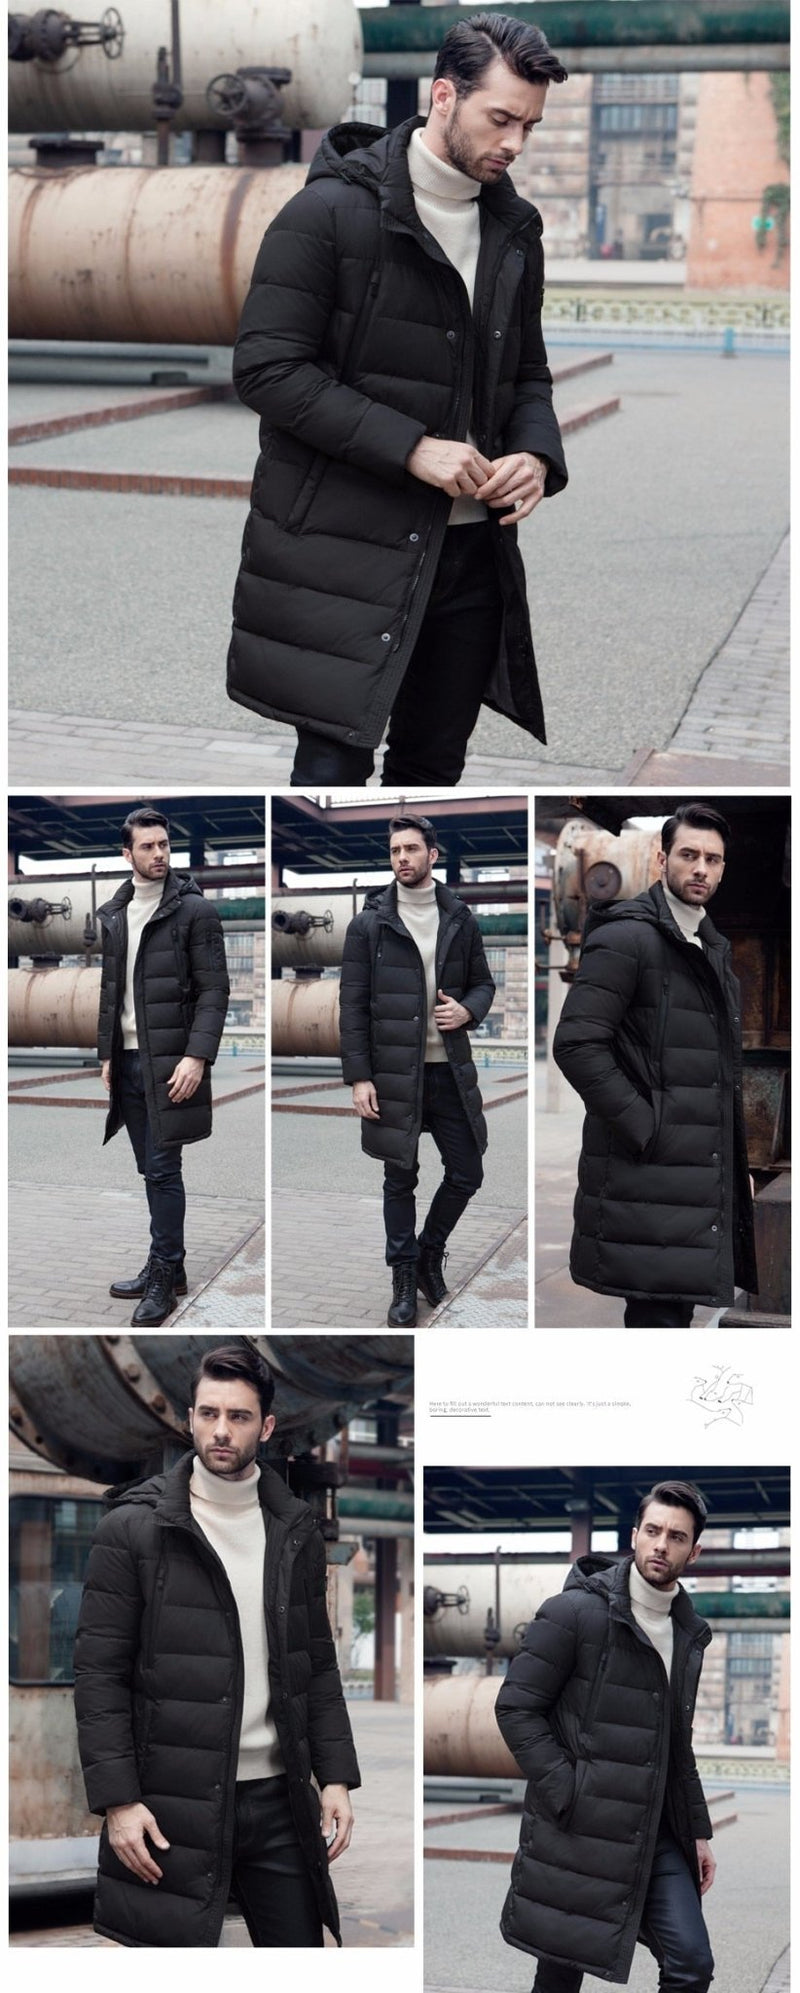 ICEbear 2019 New Clothing Jackets Business Long Thick Winter Coat Men Solid Parka Fashion Overcoat Outerwear 16M298D - Starttech Online Market